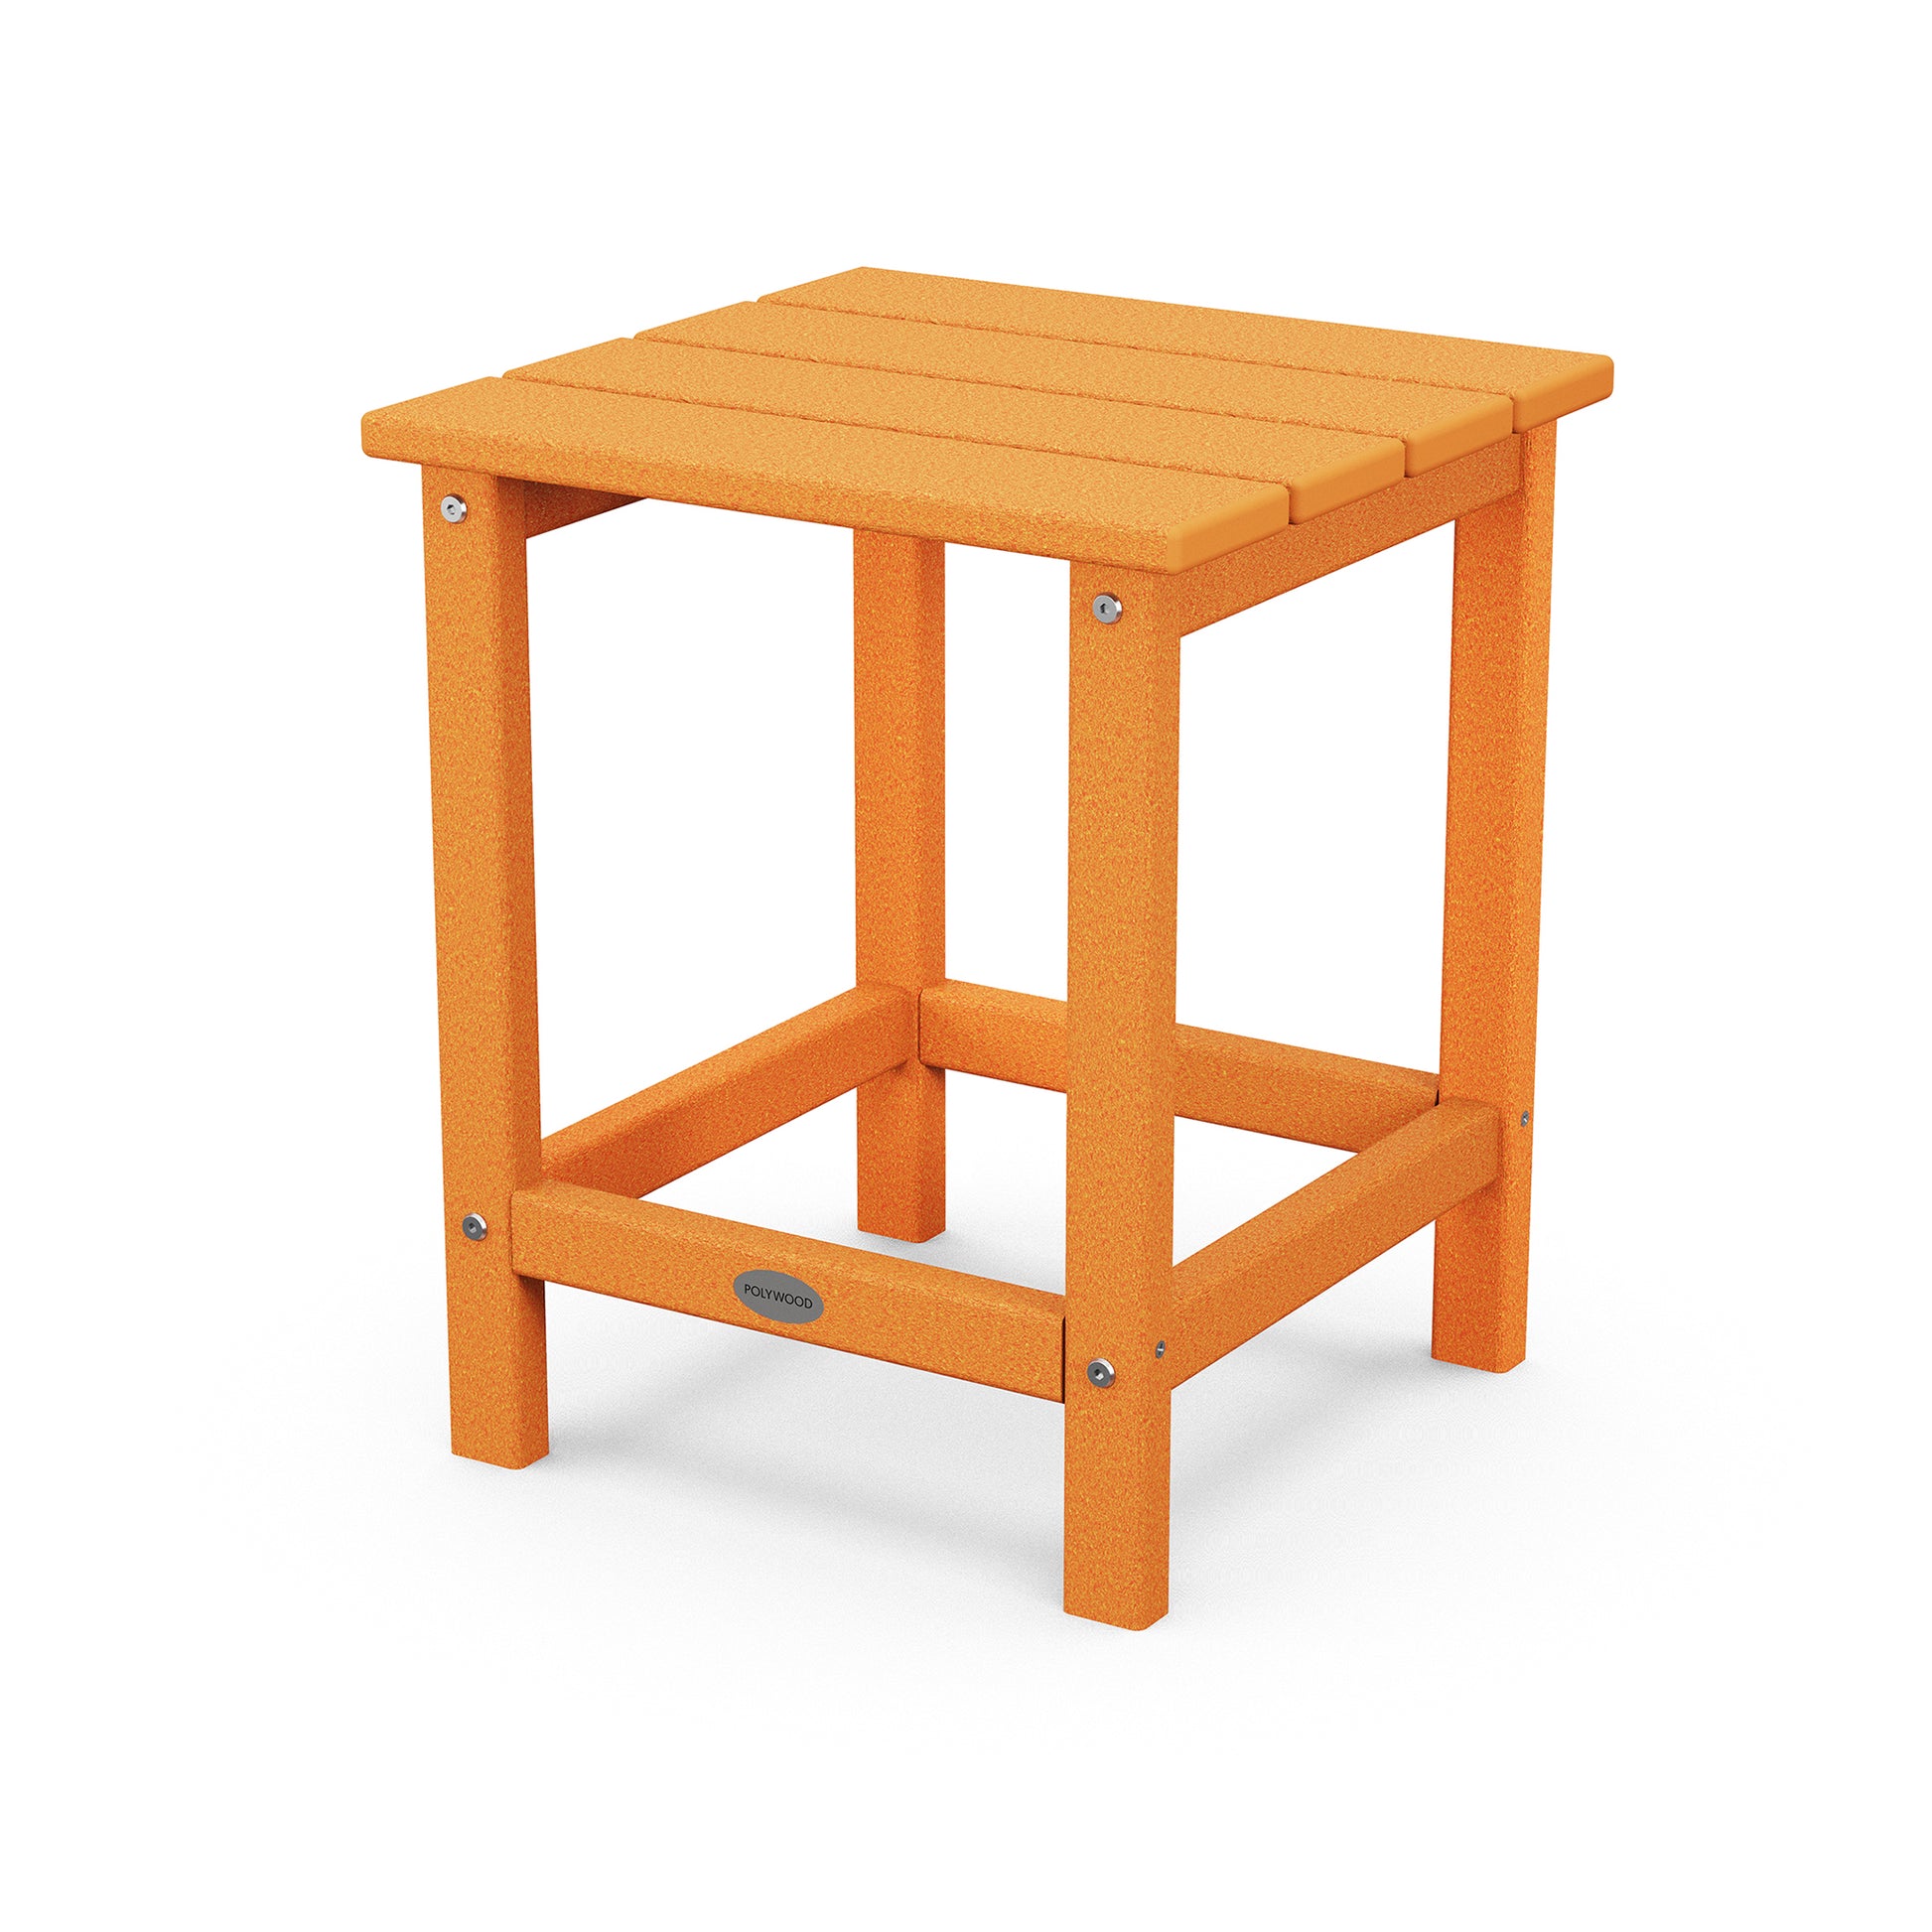 A simple, small, orange POLYWOOD Long Island 18" Side Table with a square top, four legs, and a lower connecting support beam. The table is displayed against a white background.